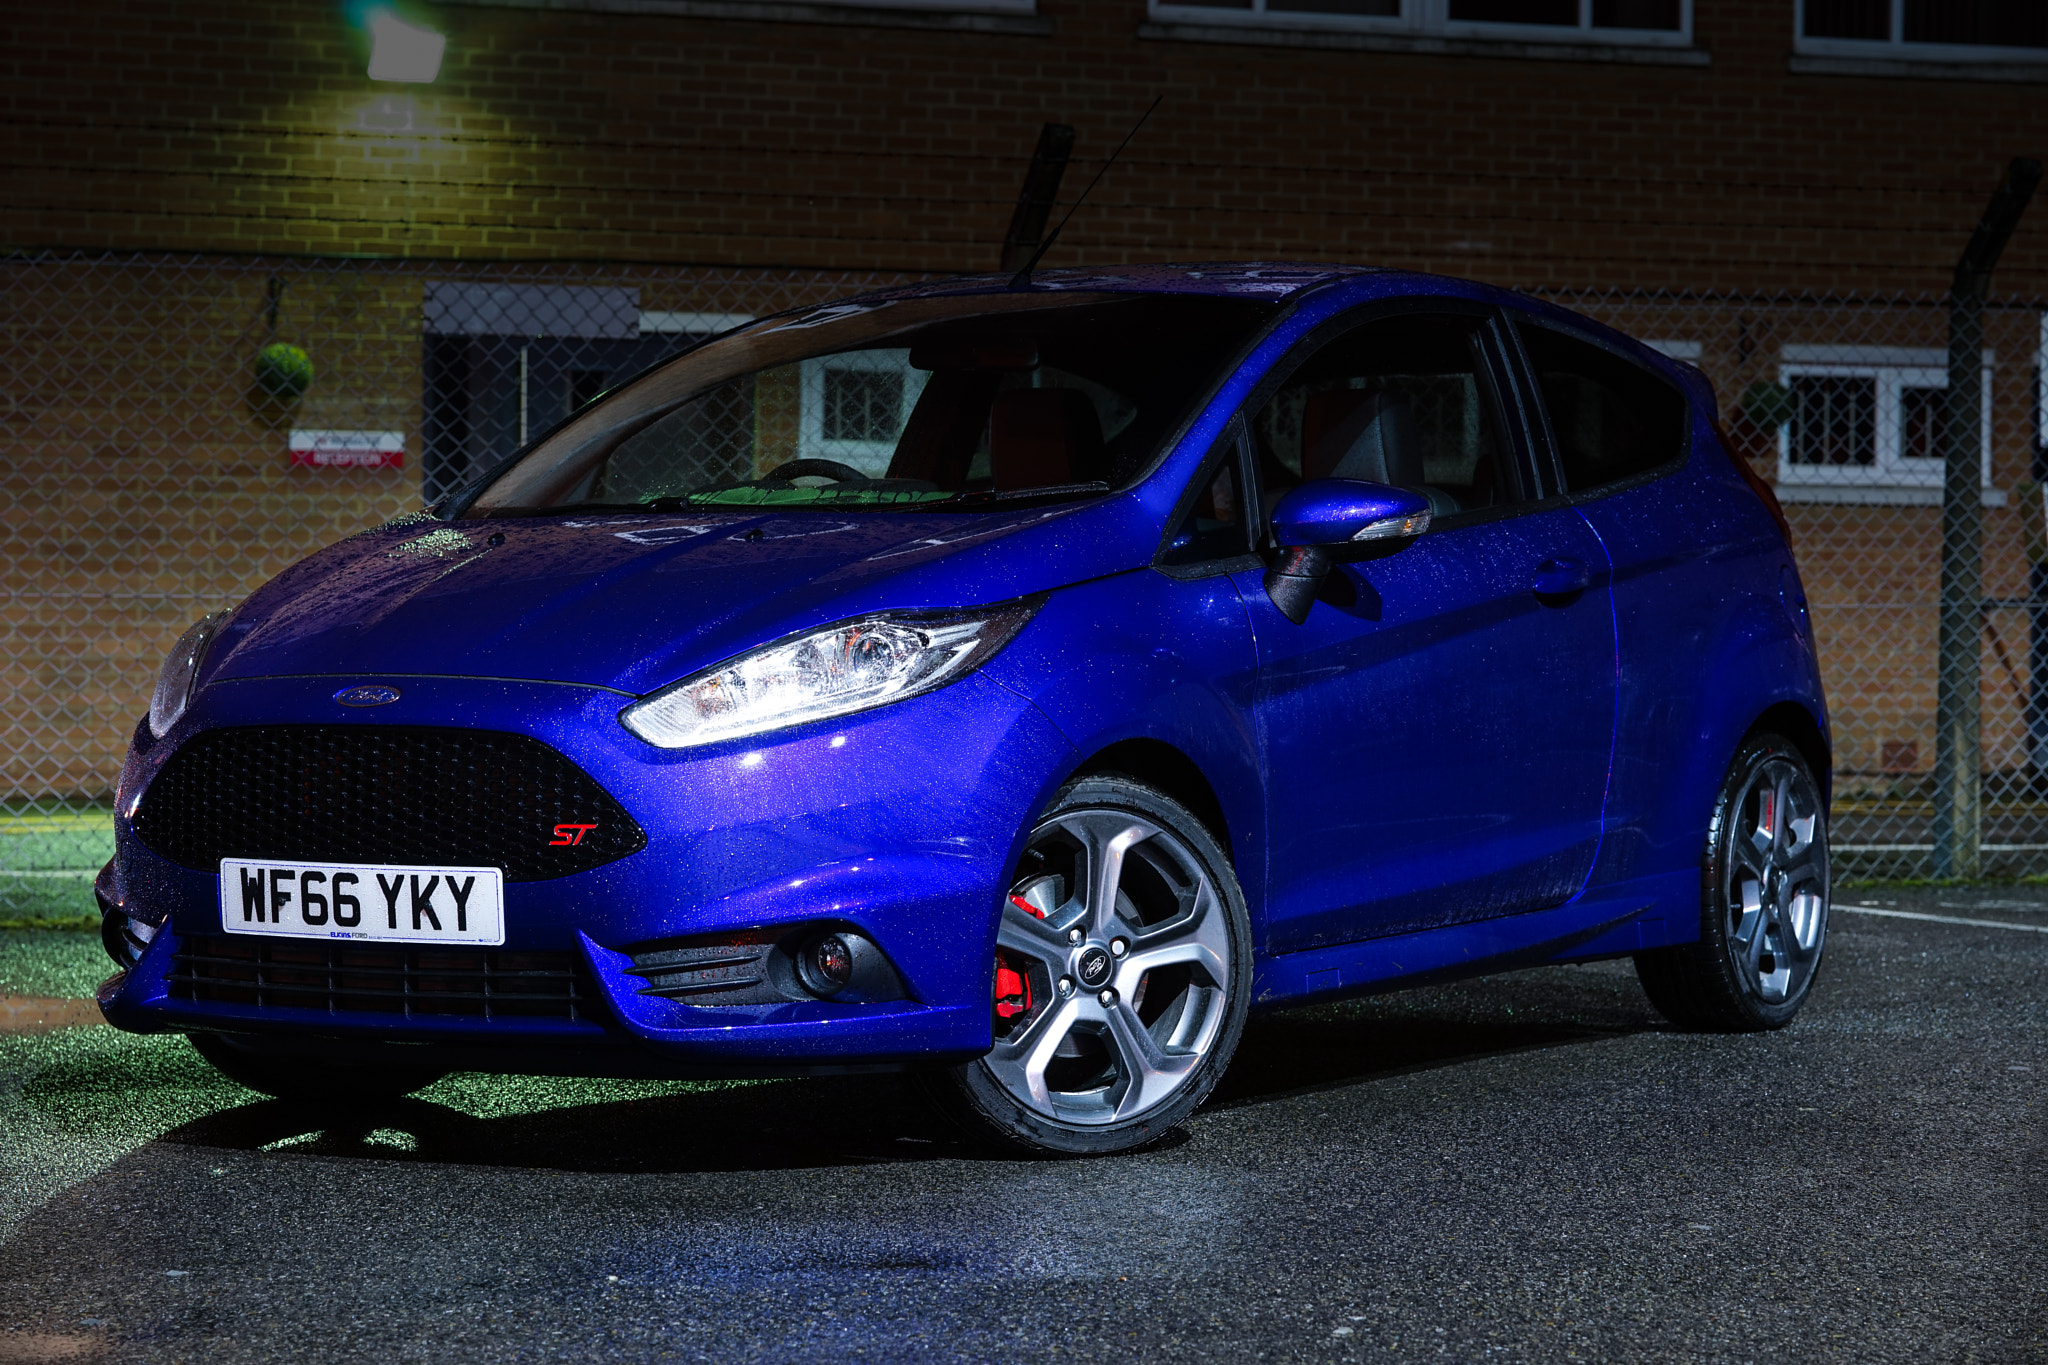 Sony a7 sample photo. Fiesta st cover photography